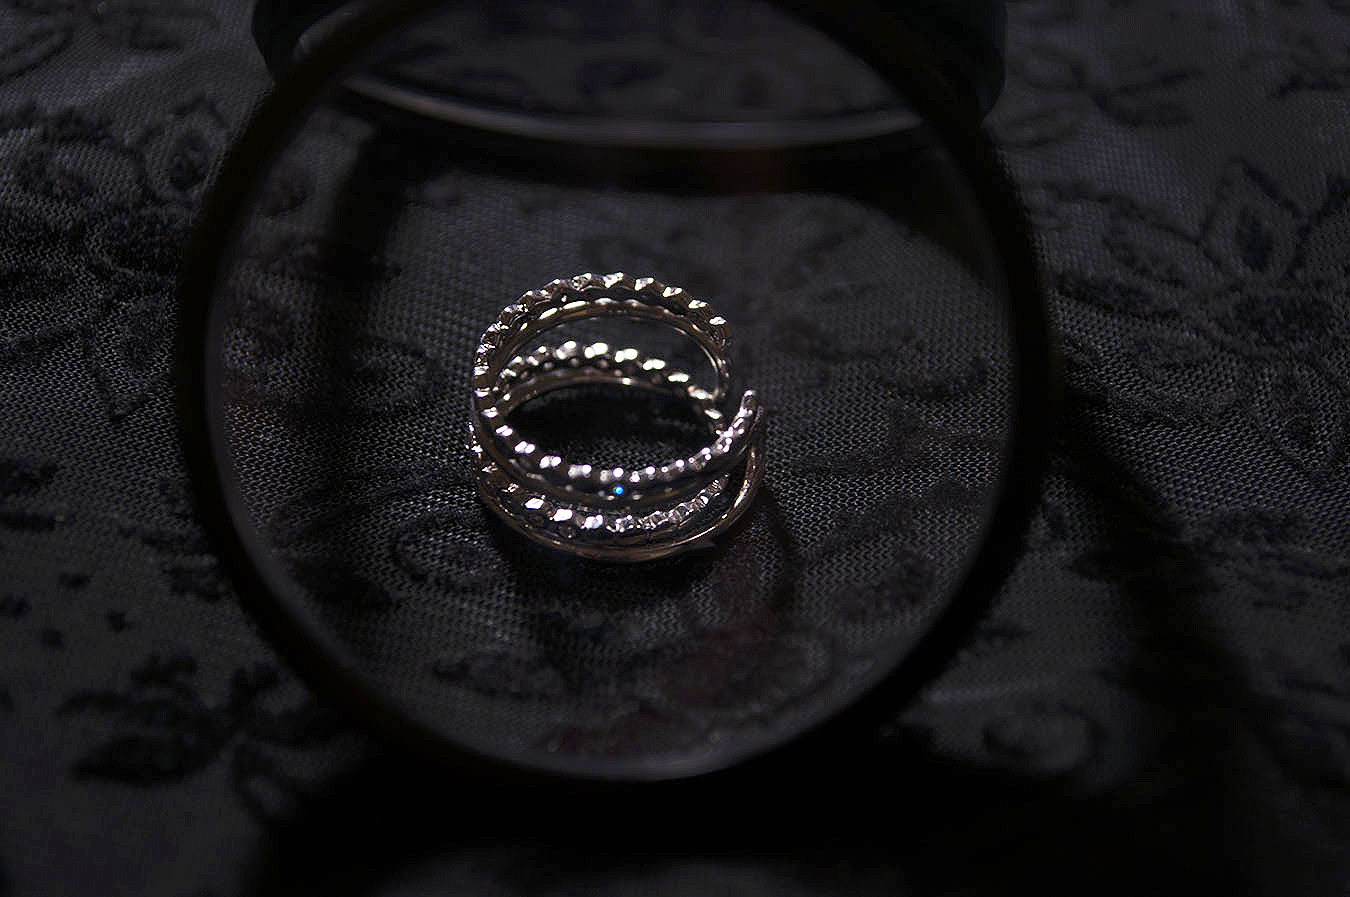 Rebecca_Huang_still_life_photography_dark_velvet_accessories_rings_jewelry_lens_magnifying_reflection_silver_honeycomb_jewels_floral_stacked